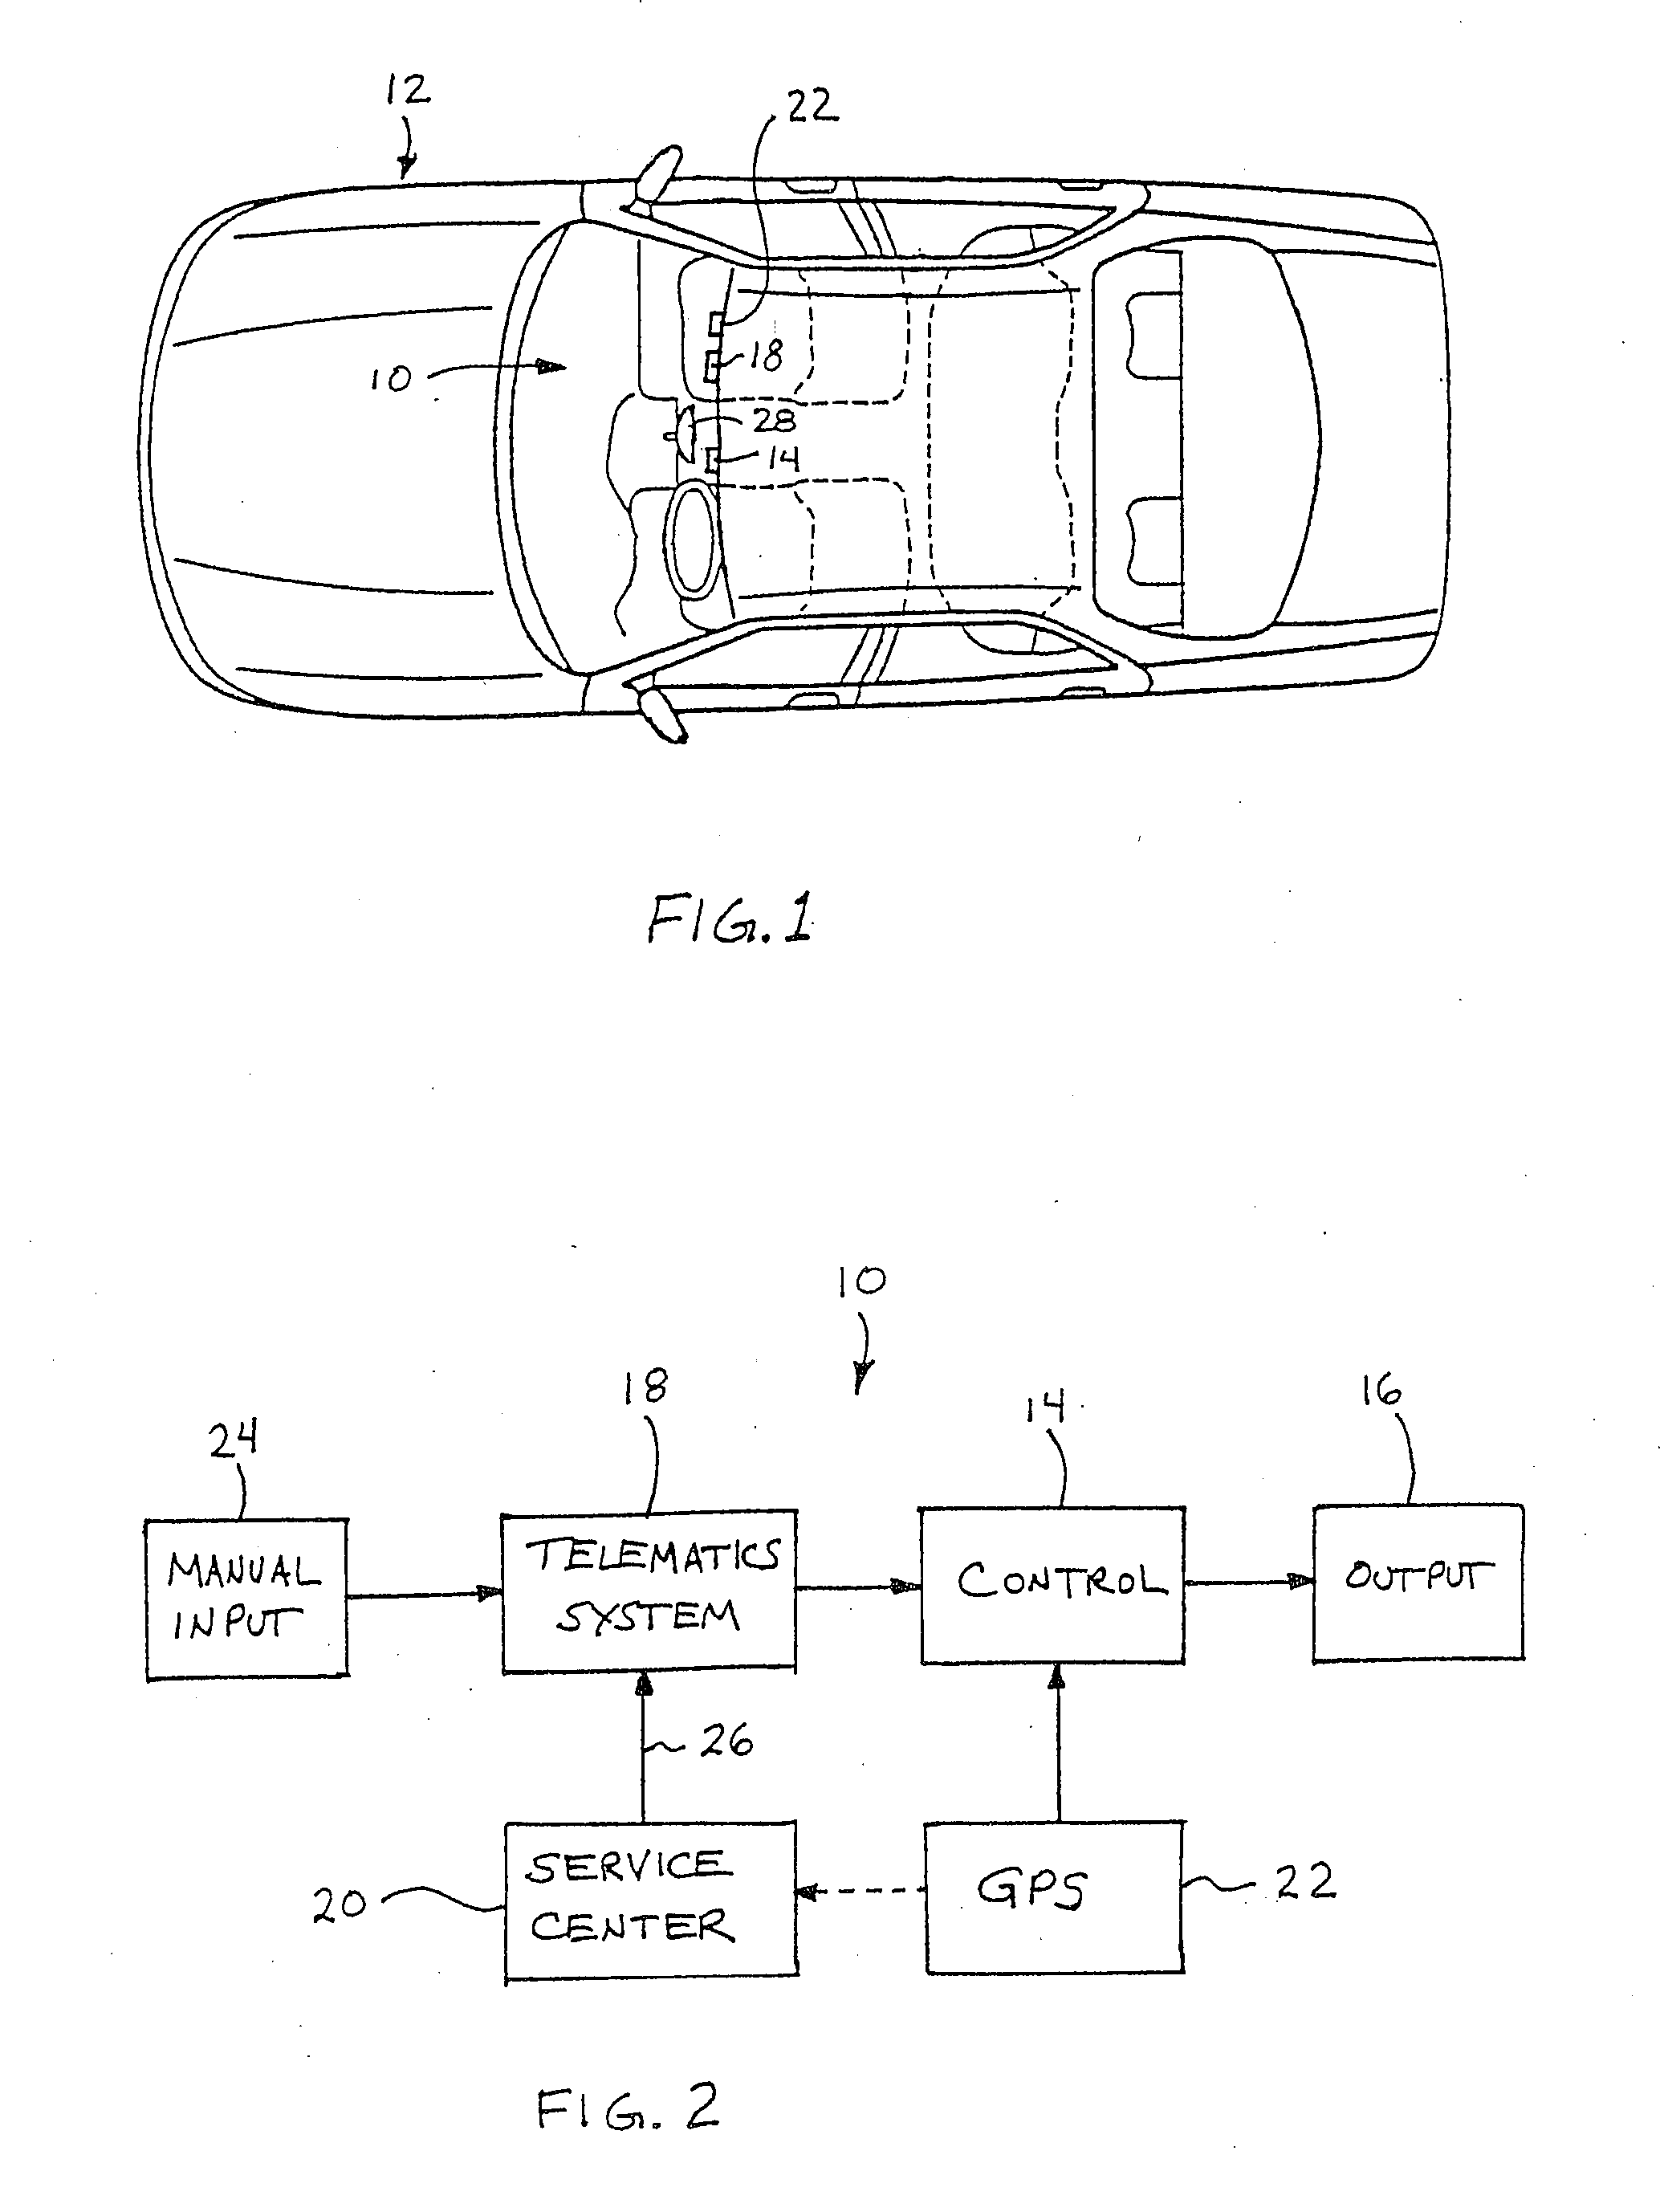 Navigational mirror system for a vehicle